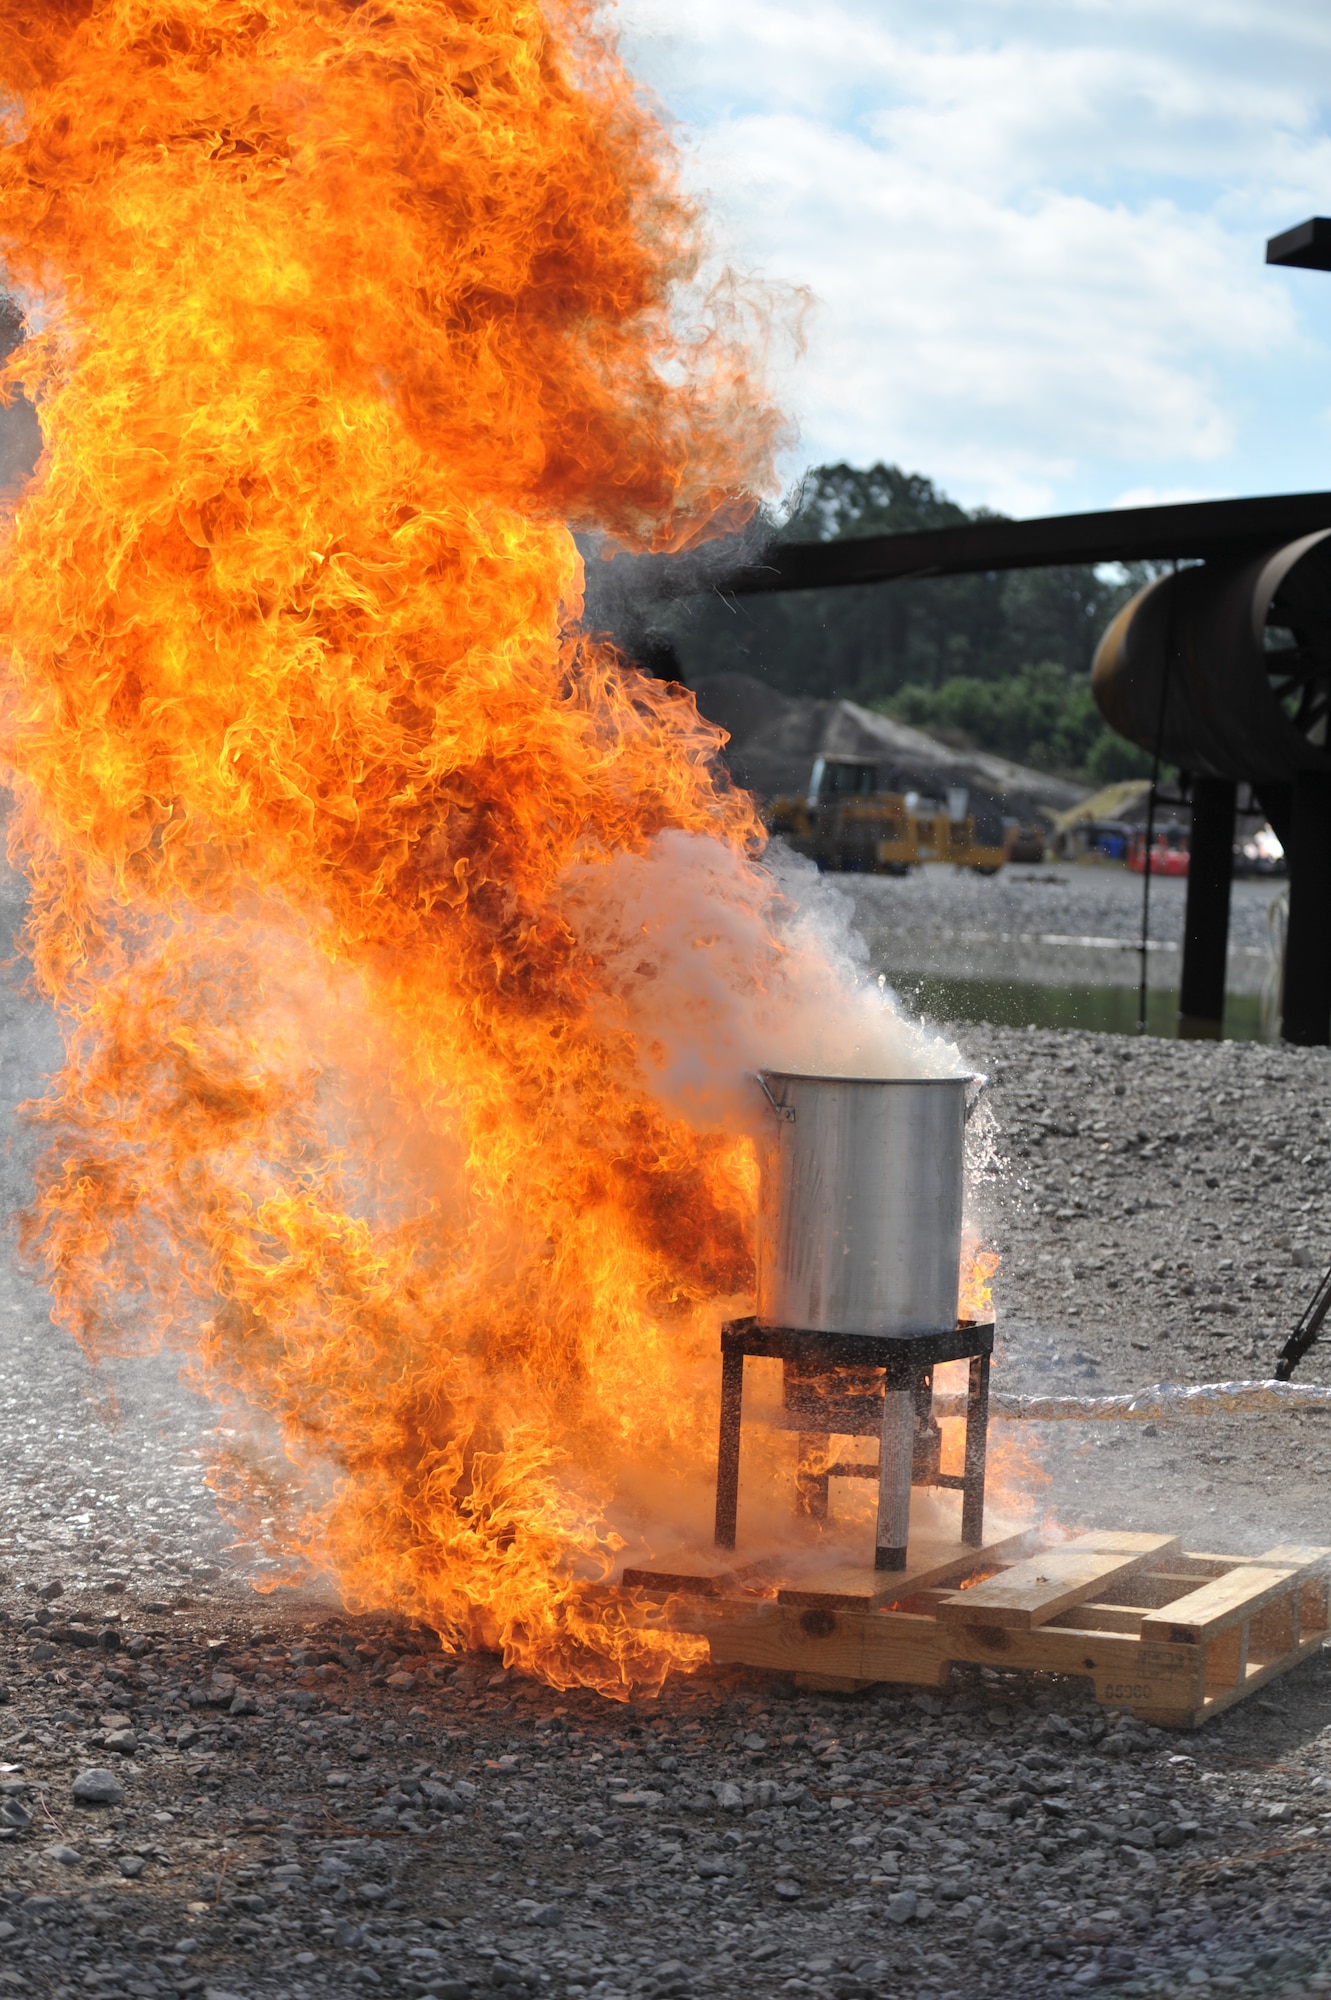 A raging fire occurs after a frozen turkey is placed in an over filled turkey fryer during a safety demonstration at the fire training area on Hurlburt Field, Fla., Nov. 27, 2013. Ensuring turkeys are thawed, slowly eased into the fryer, and not over filling fryers with oil can prevent potential fires. (U.S. Air Force photo/Staff Sgt. John Bainter)